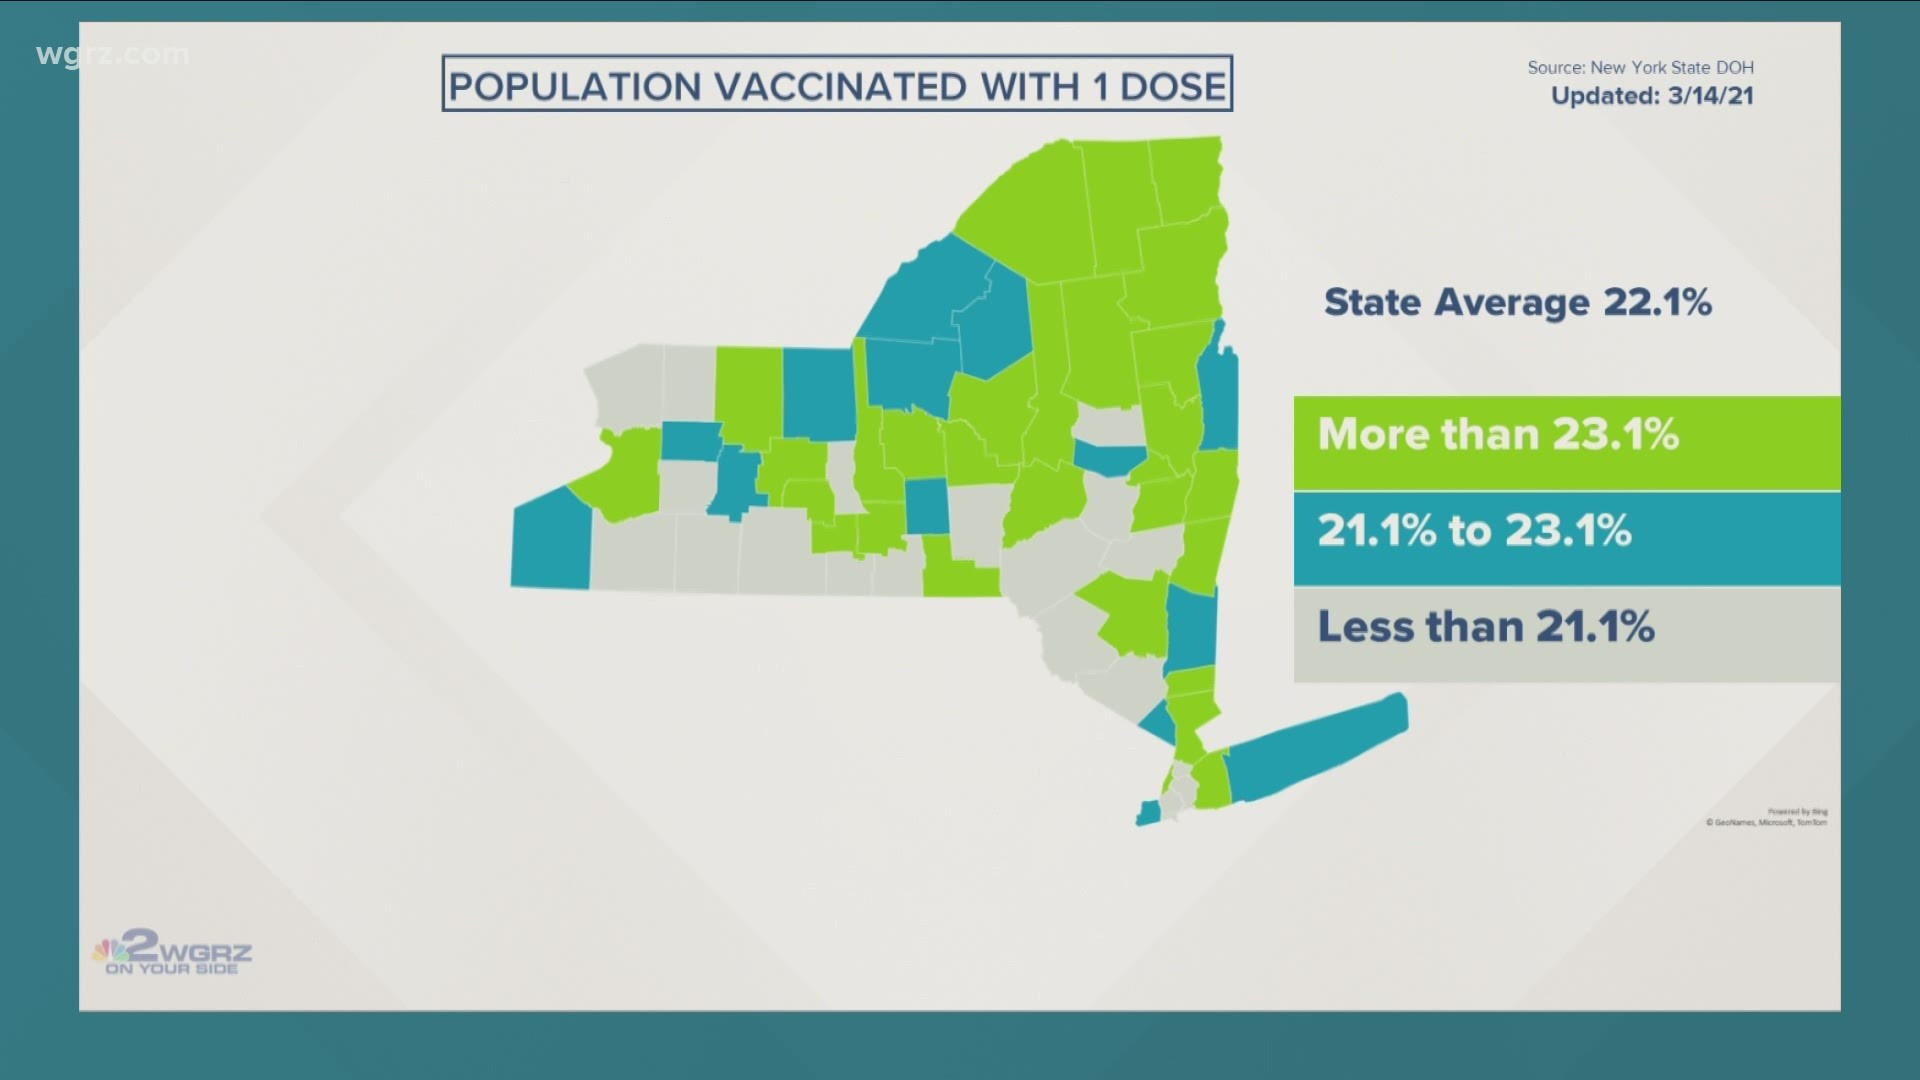 According to the state vaccine tracker, 22.1% of the state population has now received at least one dose of the vaccine.